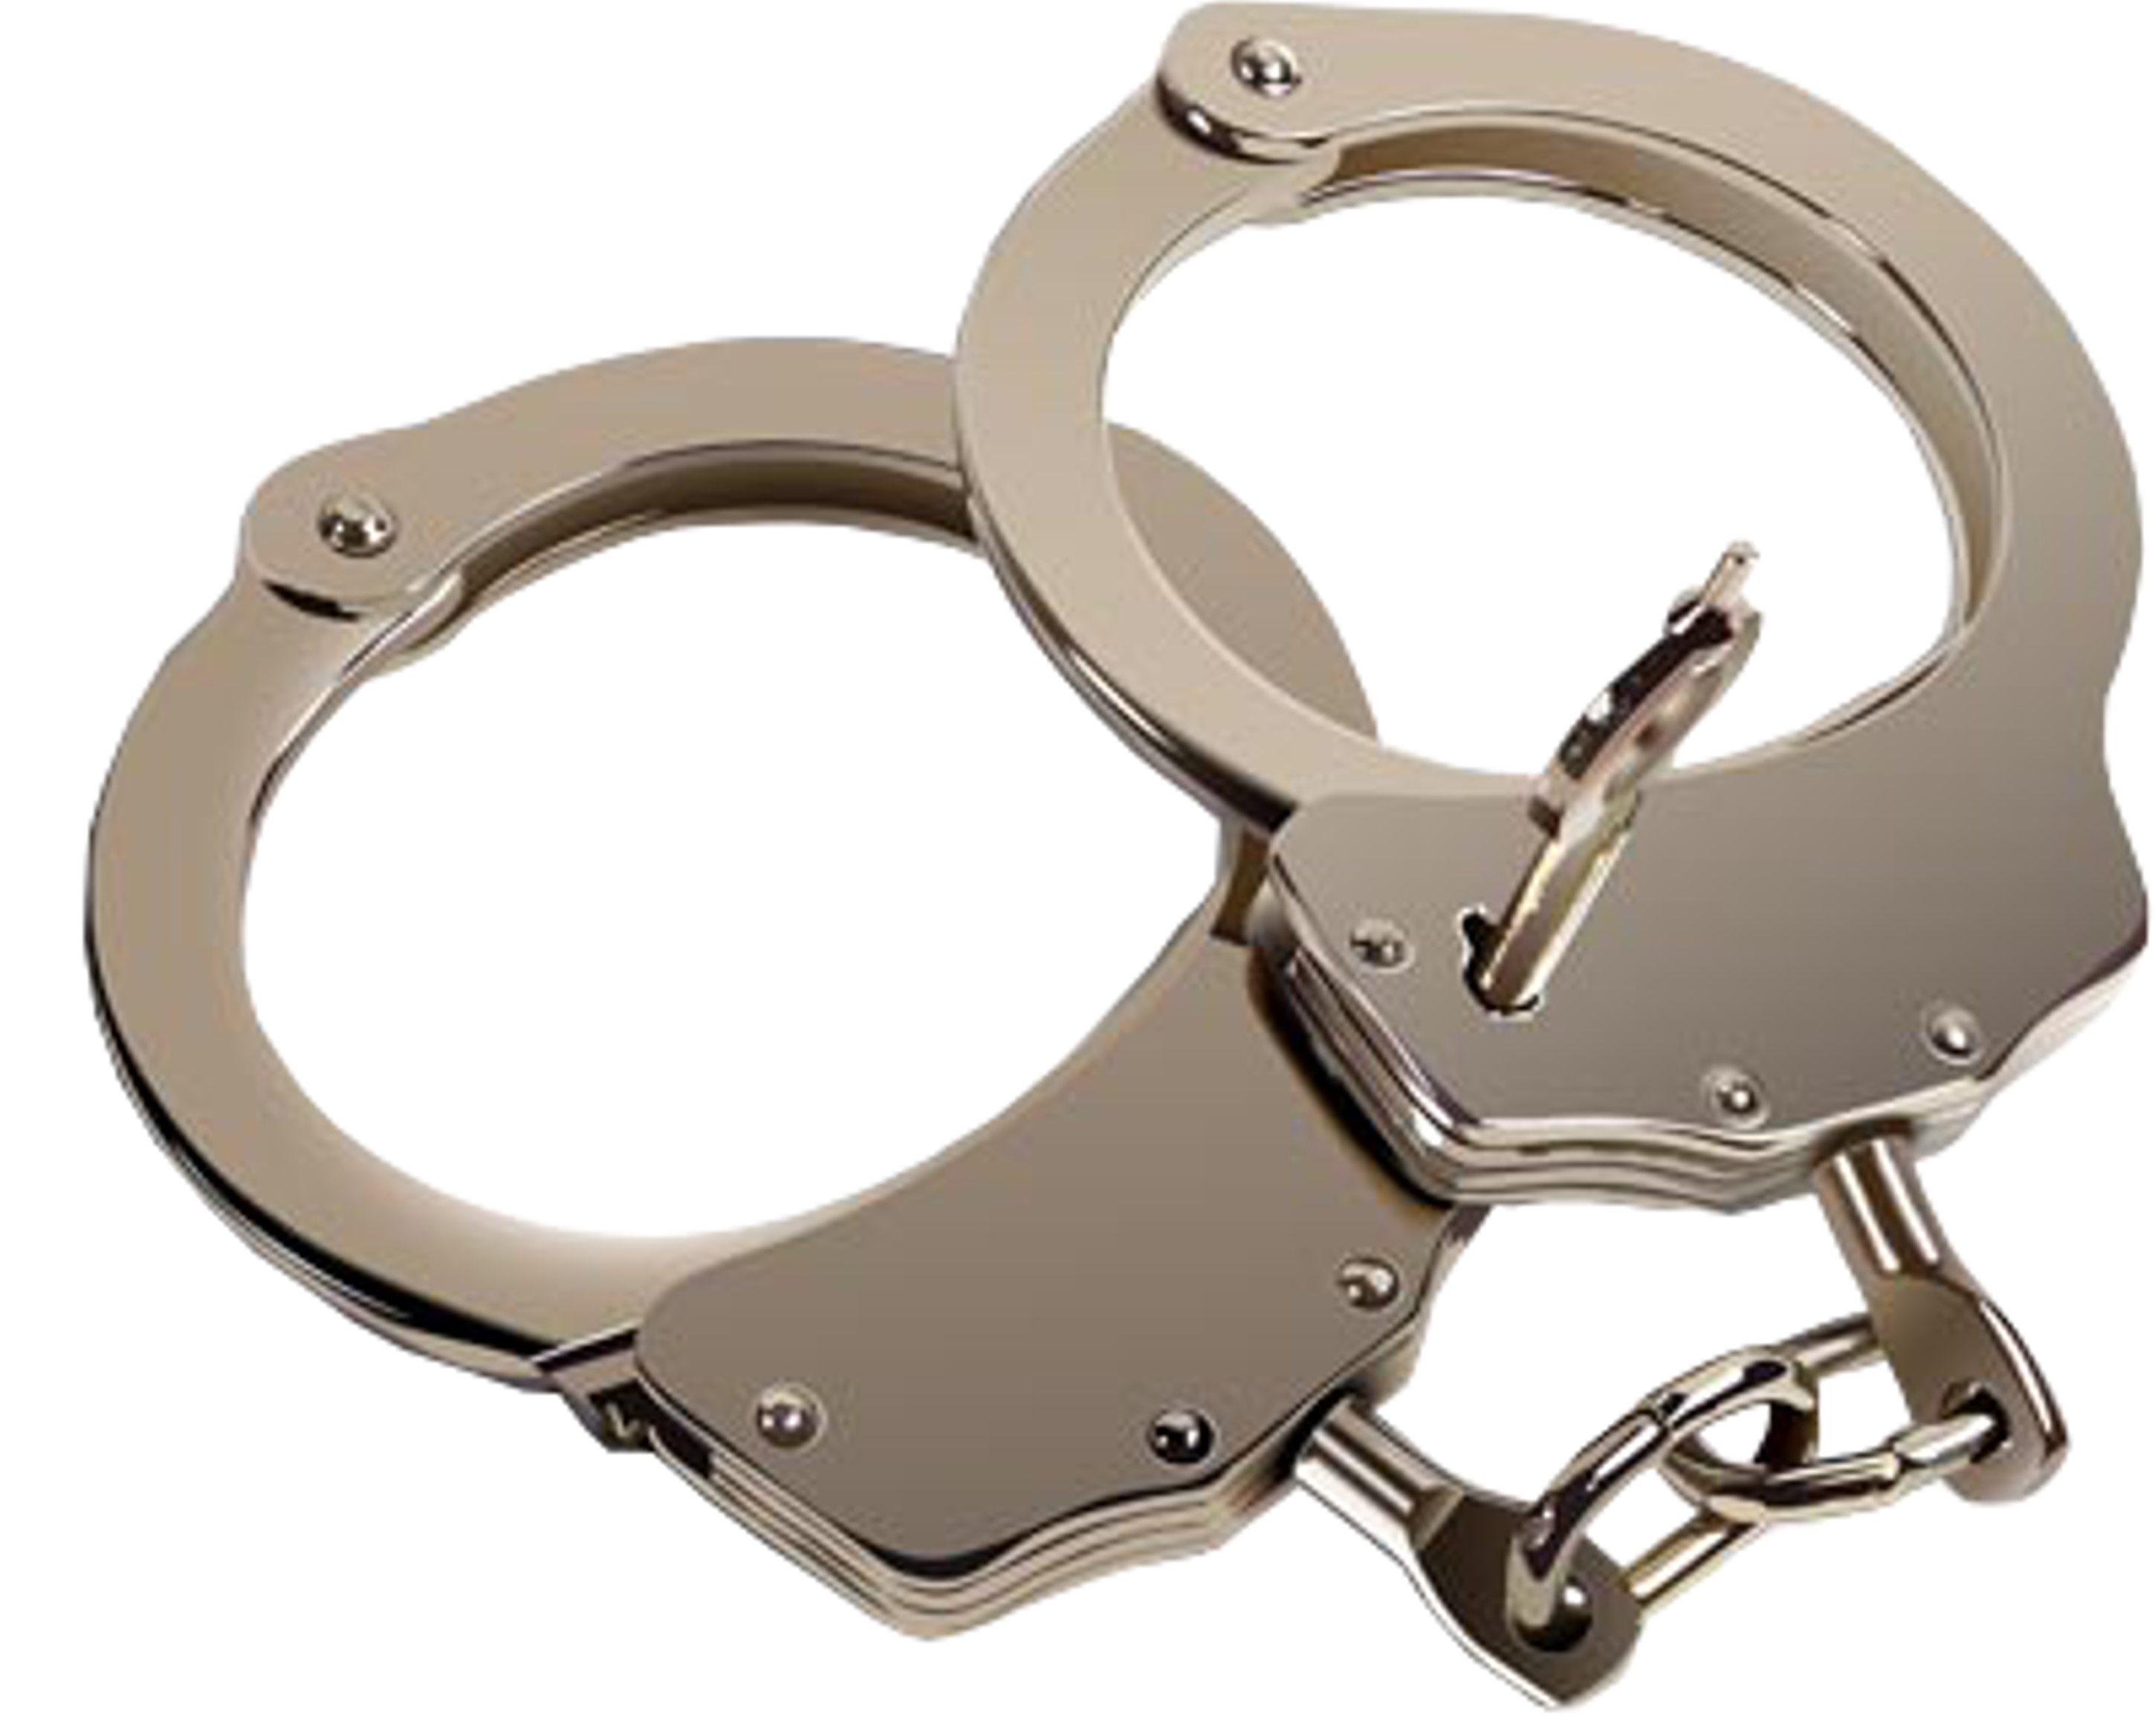 Cuffed Hands PNG - 135295